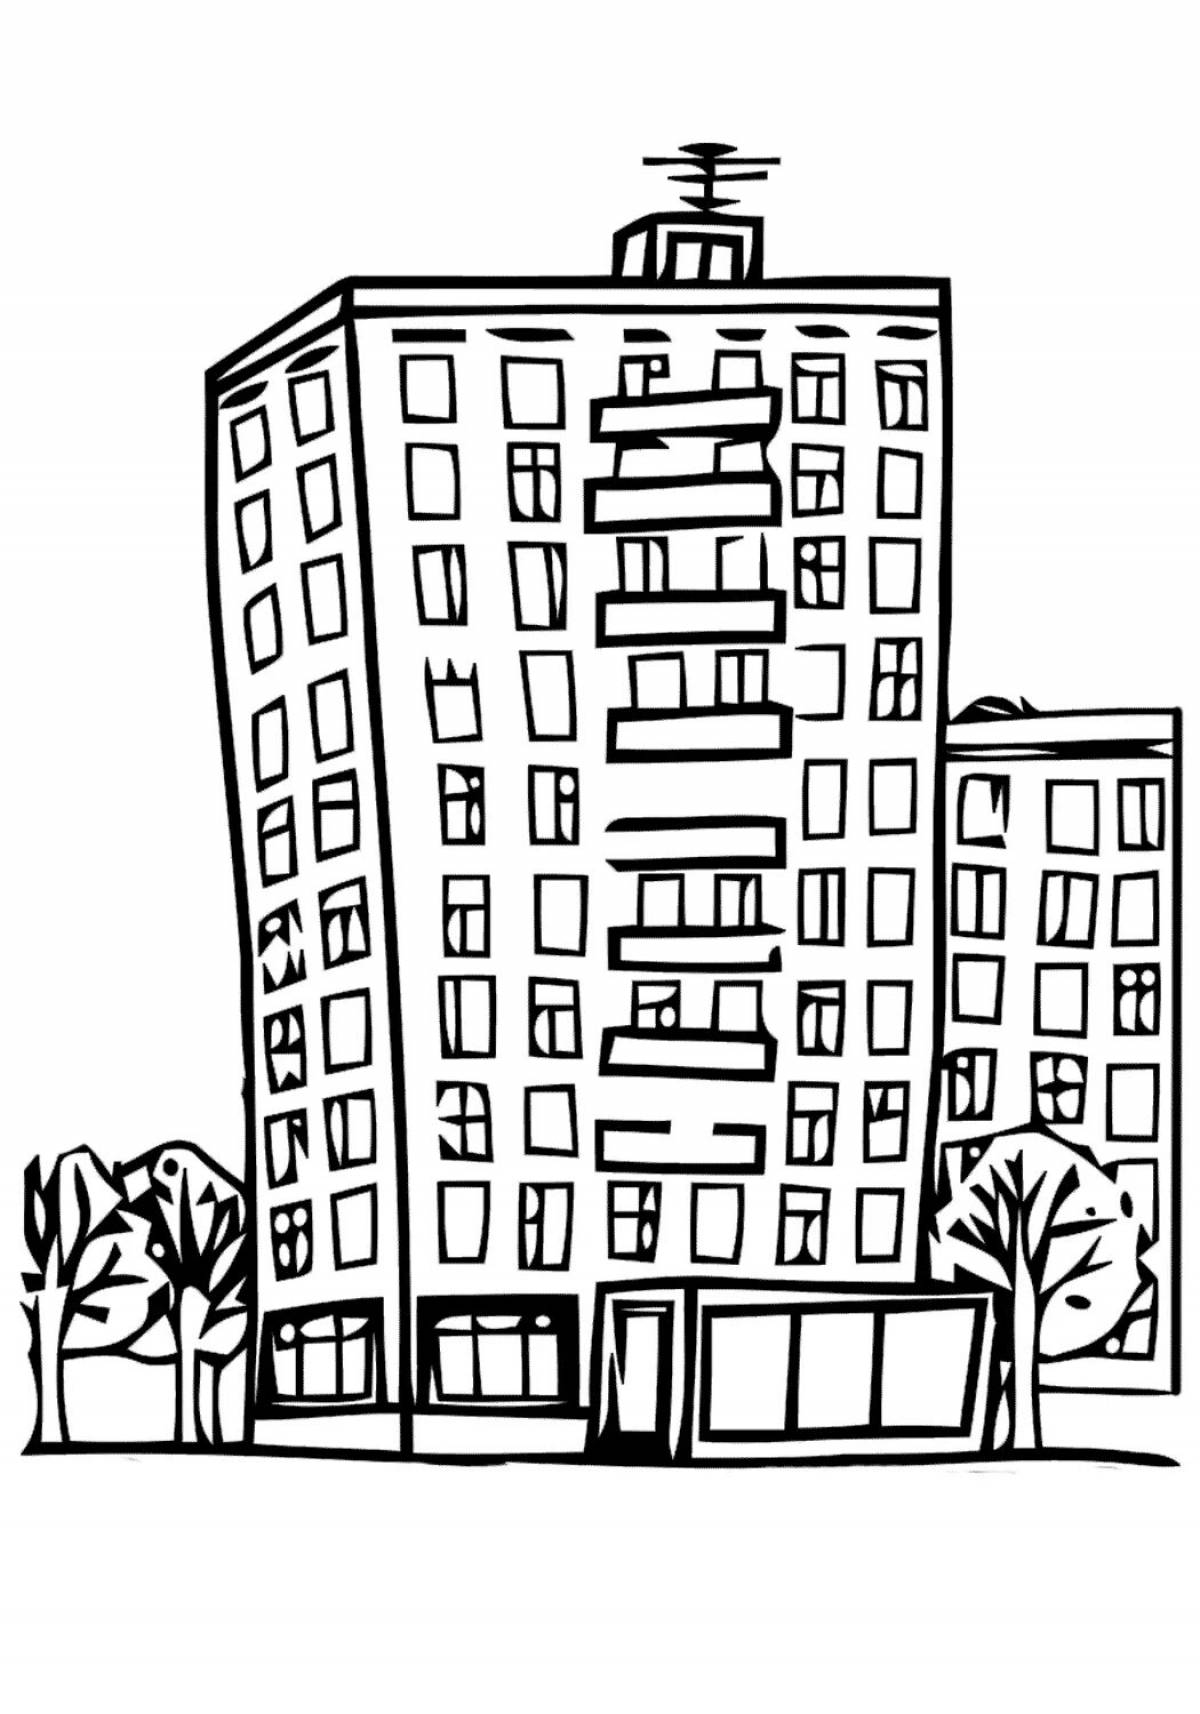 High-rise coloring pages for kids